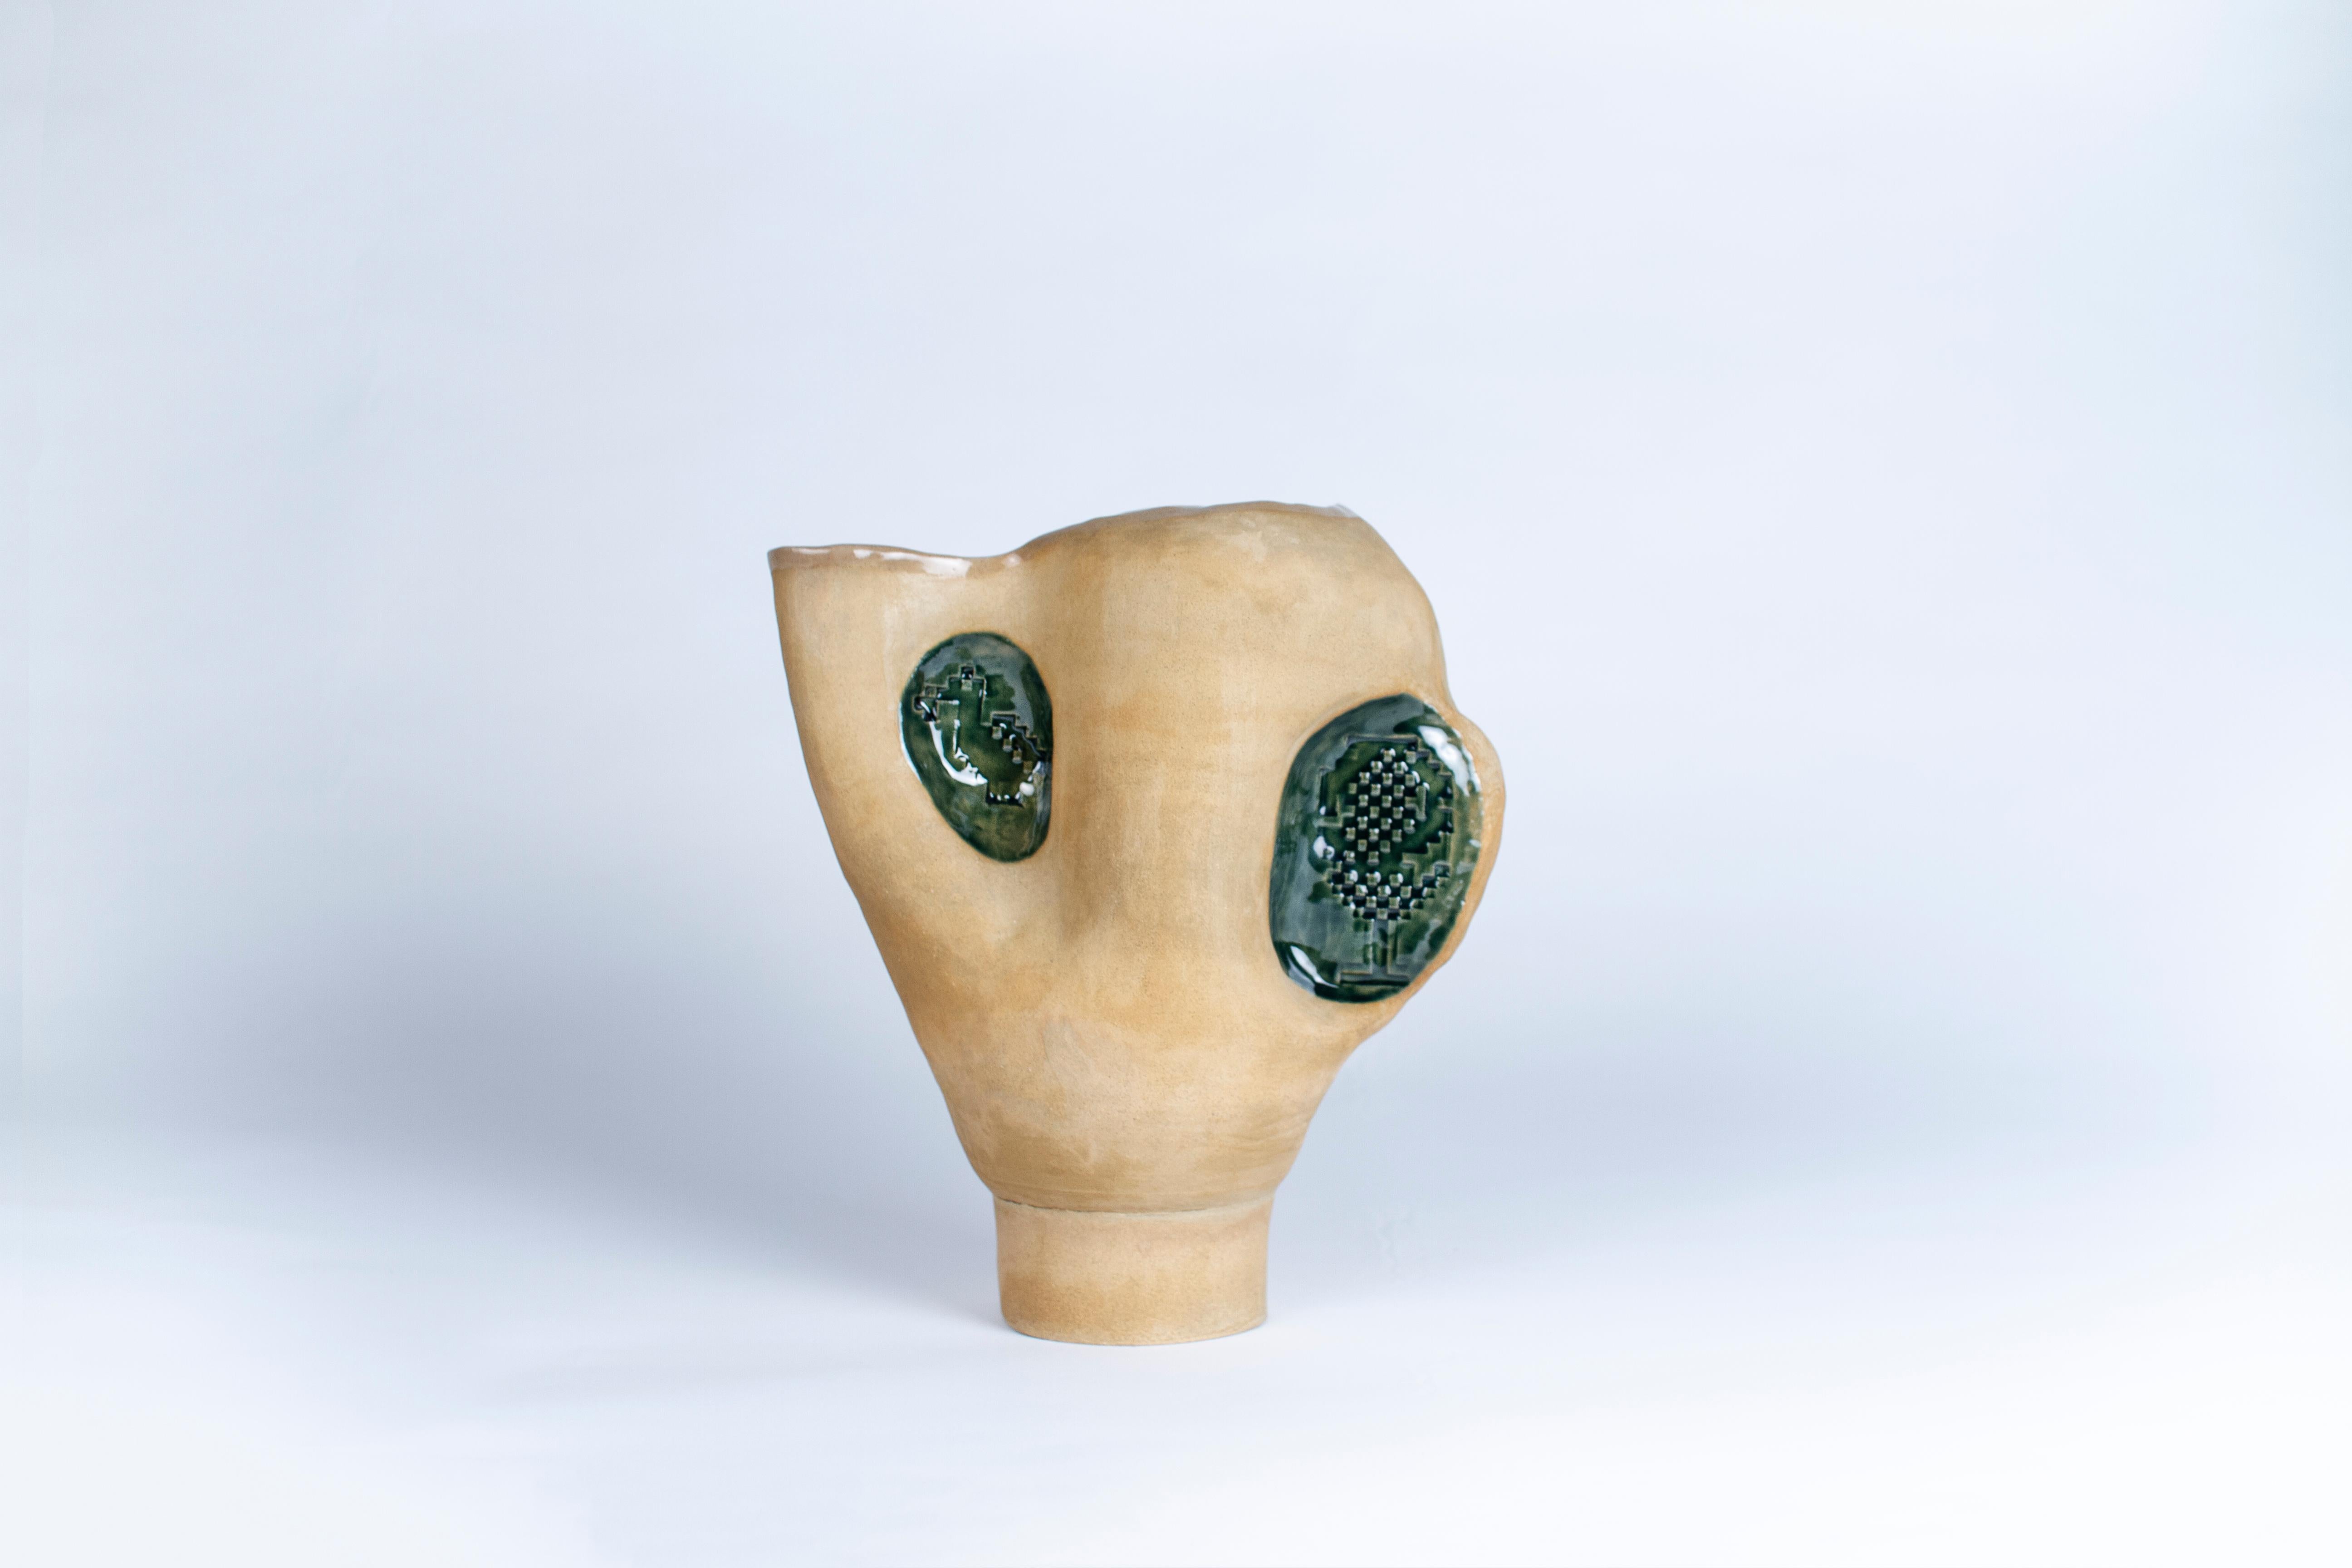 Bird jug vase by Faissal El-Malak
Dimensions: 28 x 15 x 33 cm
Materials: Ceramic

Faissal El-Malak is a Palestinian designer who was brought up between Montreal Canada and Doha Qatar. He trained as a fashion designer in Paris’ Atelier Chardon